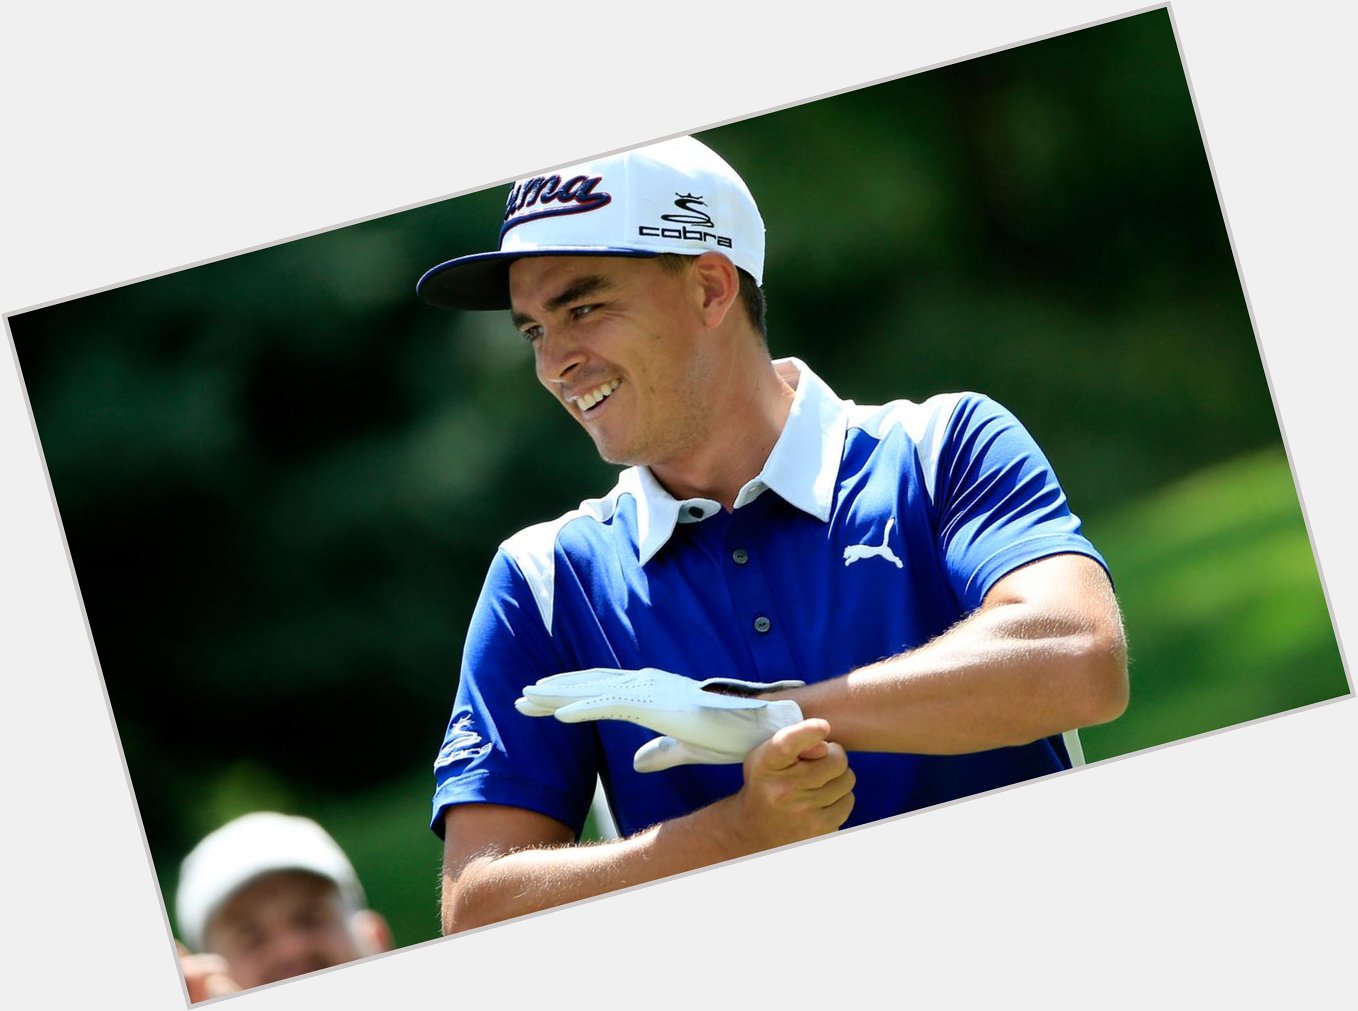 Three wins in 2015? Not too shabby. Join us in wishing world No. 6 Rickie Fowler a very Happy Birthday! 